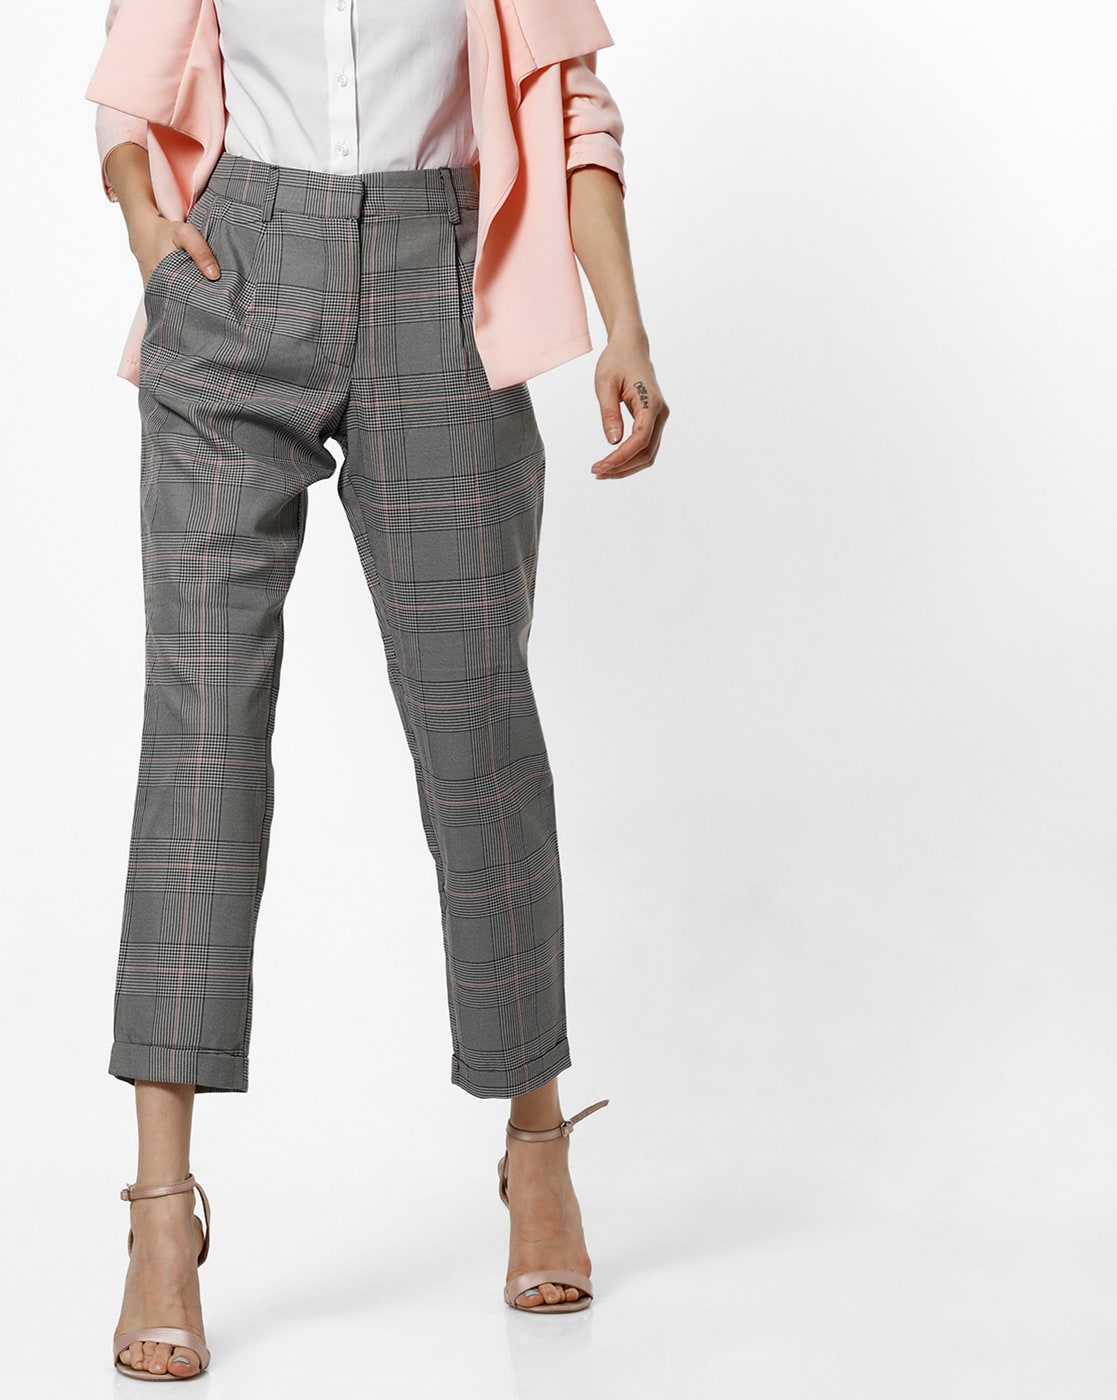 So Sage wearing a turtleneck with plaid pants | Plaid fashion, Work outfit,  Work outfits women